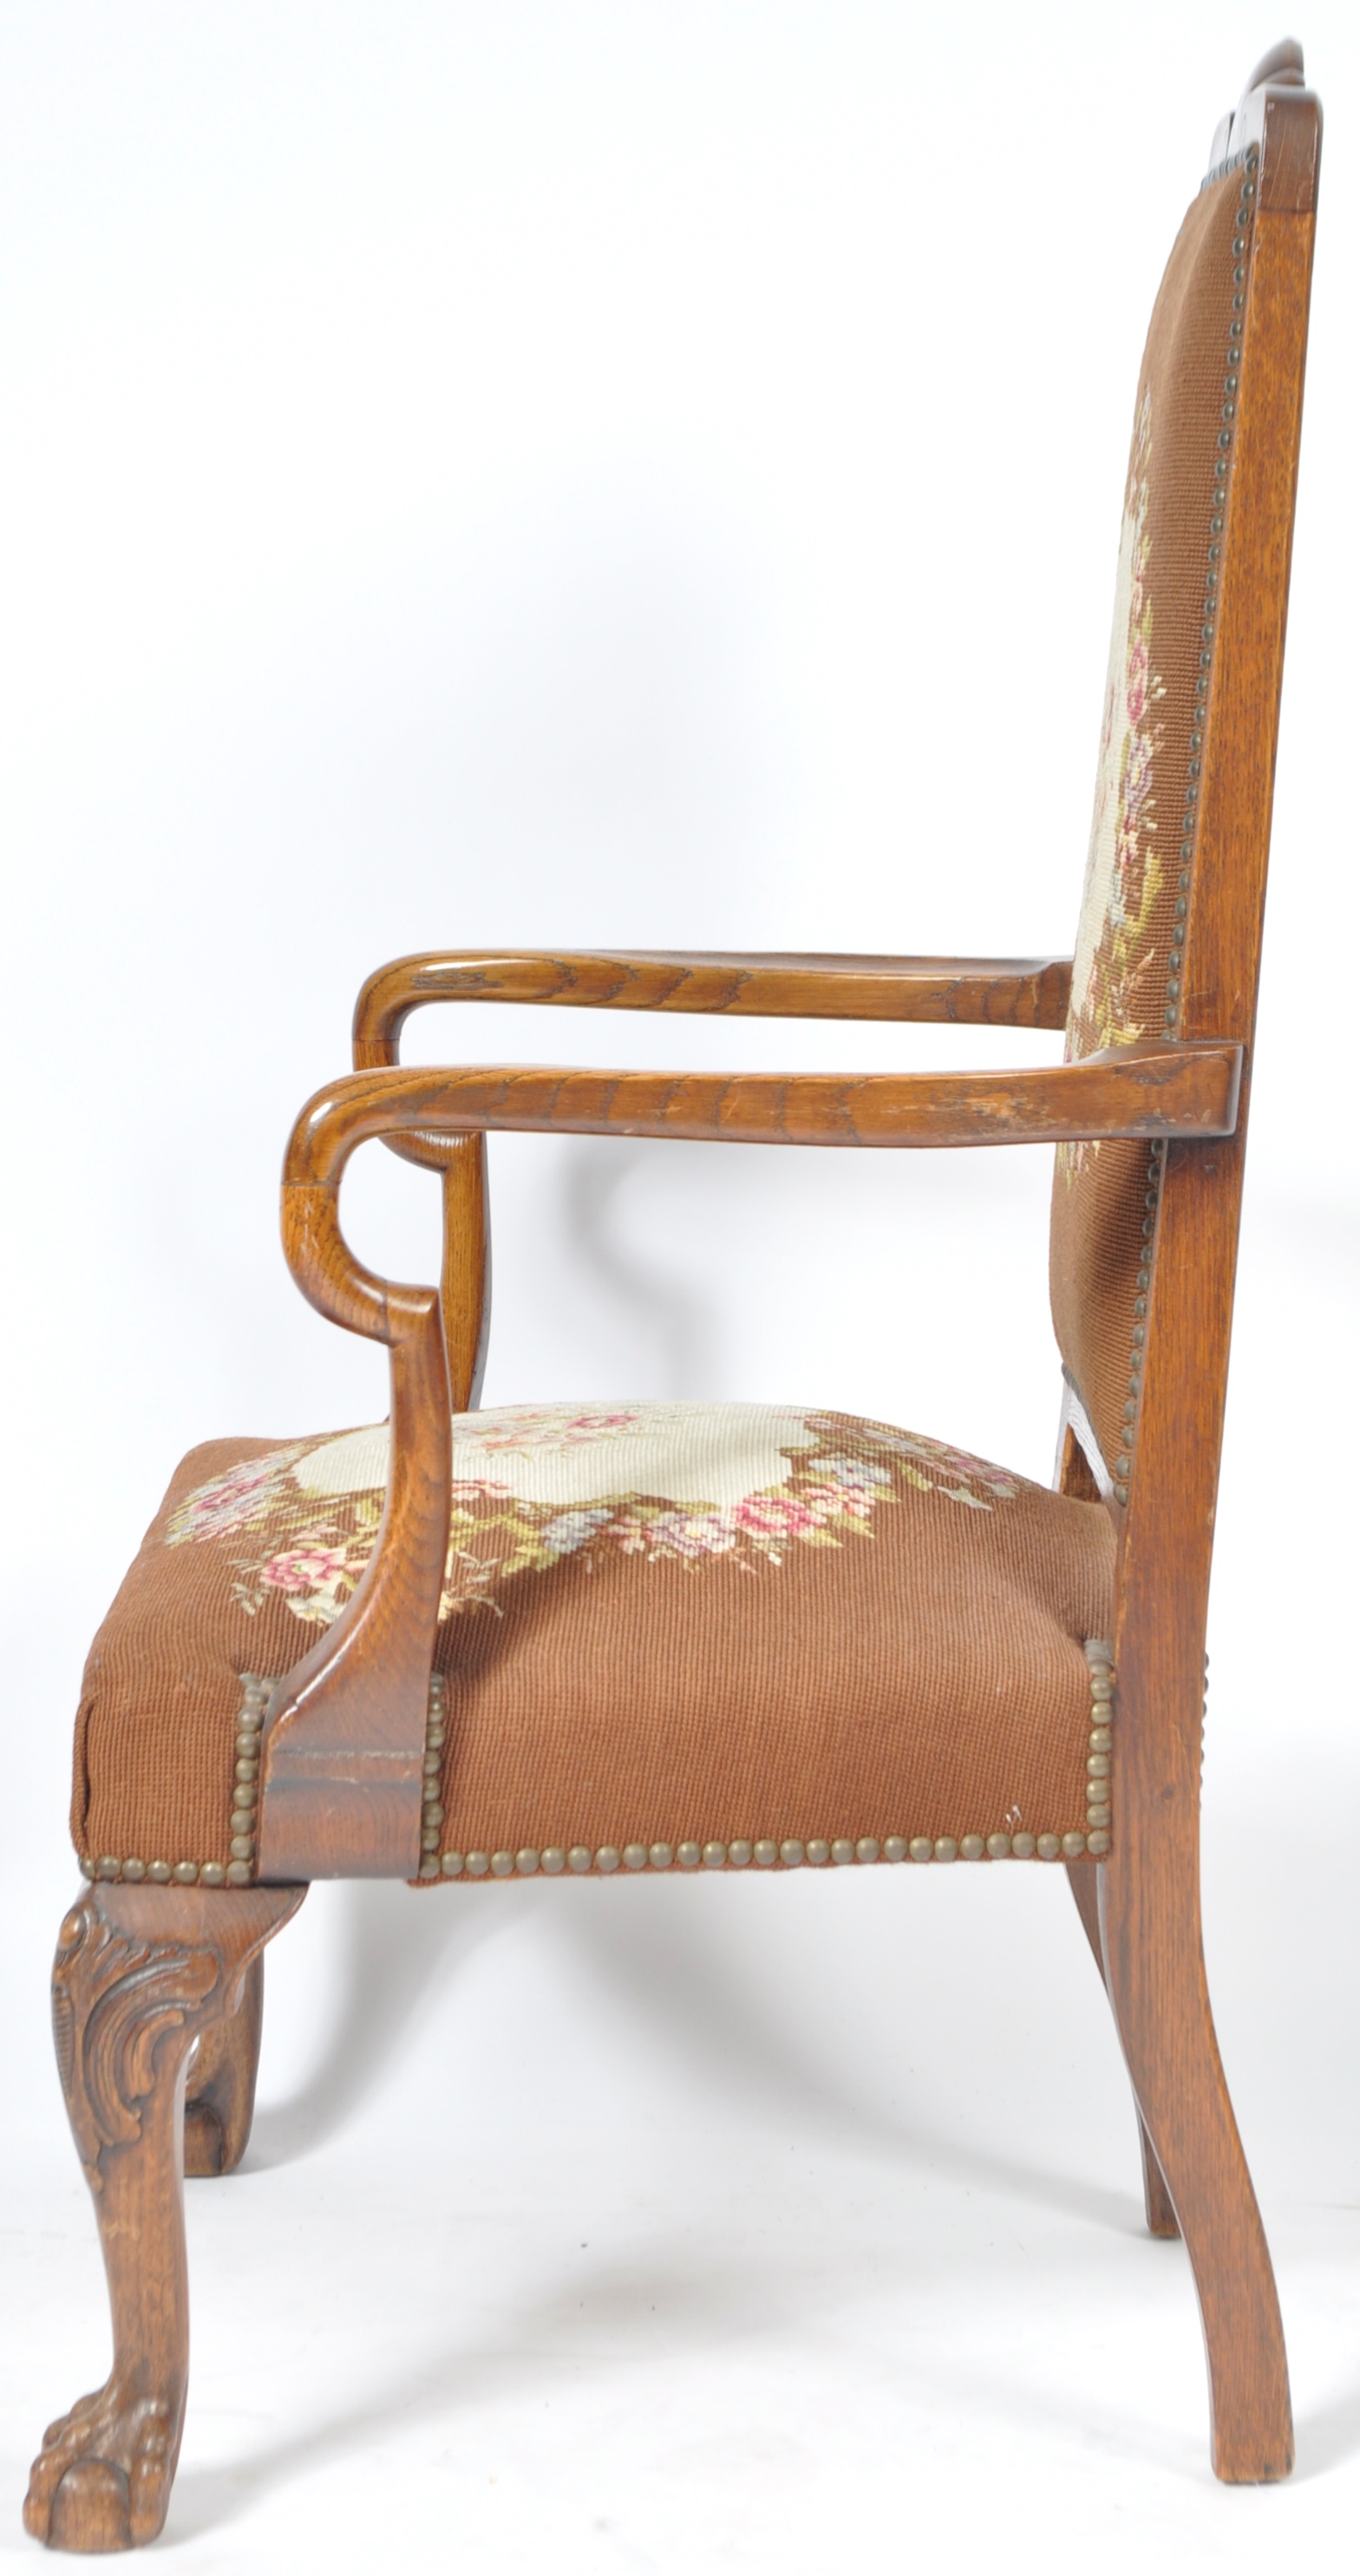 ANTIQUE 19TH CENTURY QUEEN ANNE REVIVAL OAK TAPESTRY ARMCHAIR - Image 9 of 9